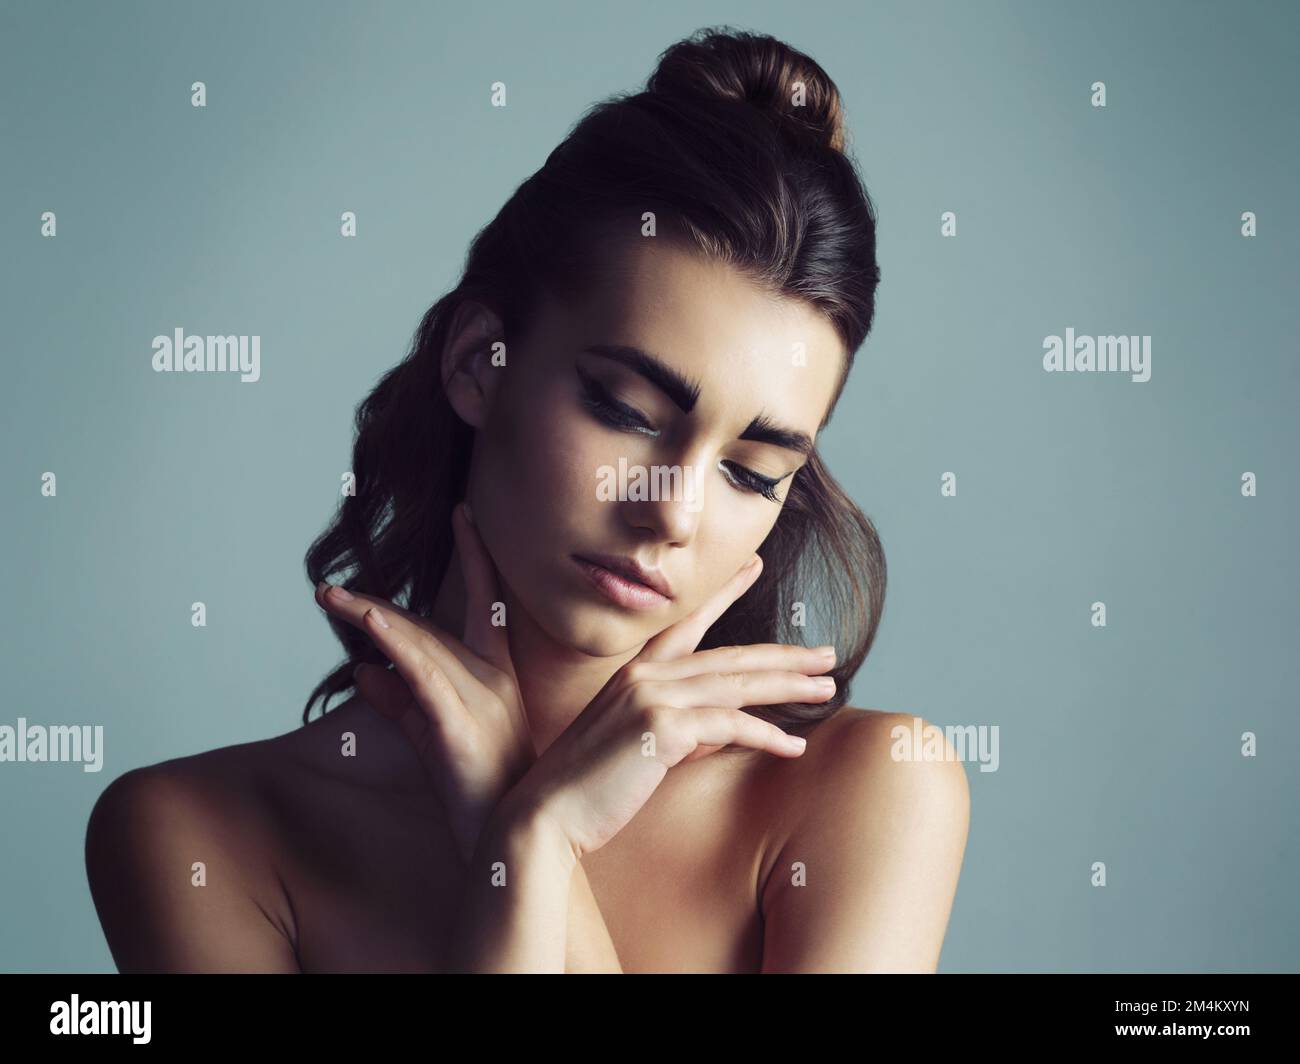 Being normal is overrated. Studio shot of an attractive young woman wearing artistic makeup. Stock Photo